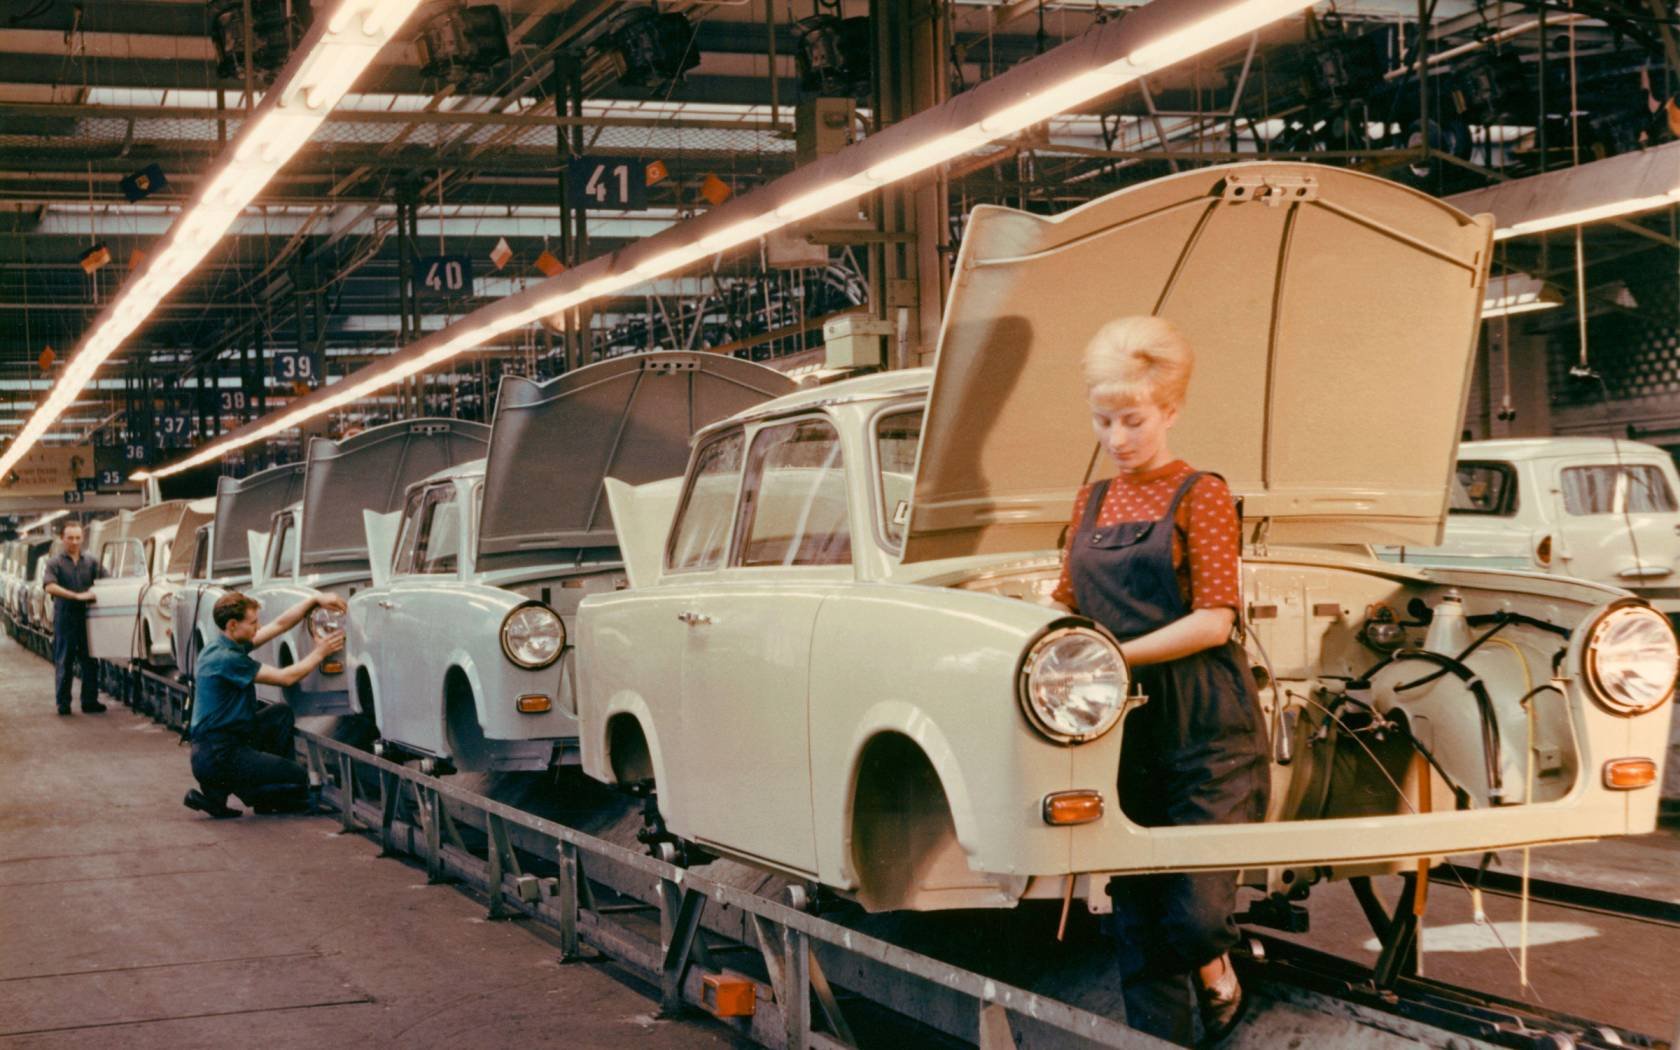 The Trabant car being manufactured at the East German Sachsenring car plant.